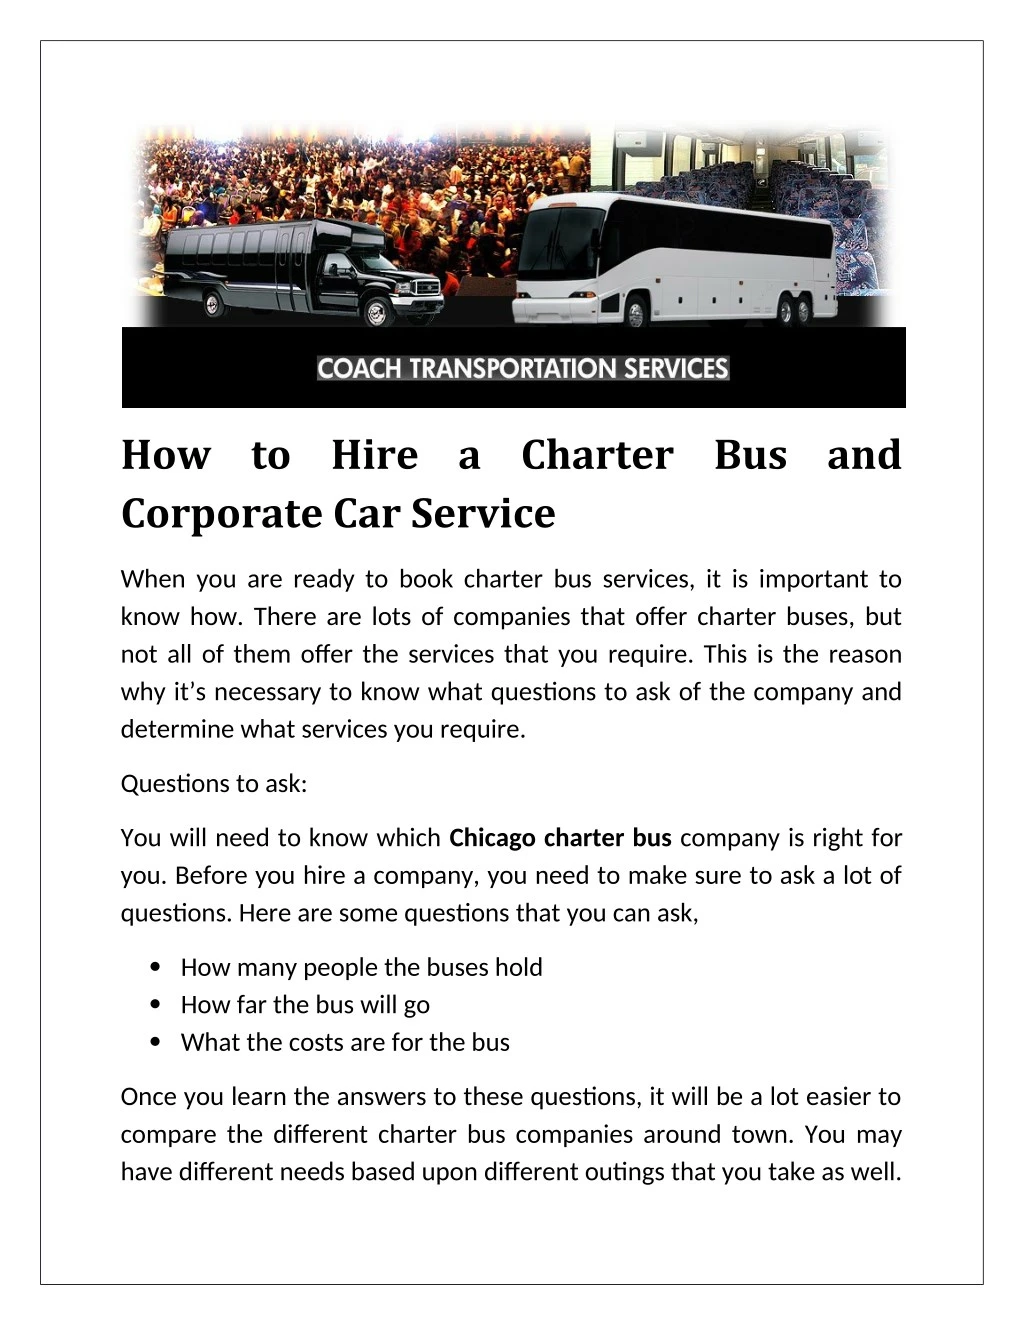 how to hire a charter bus and corporate